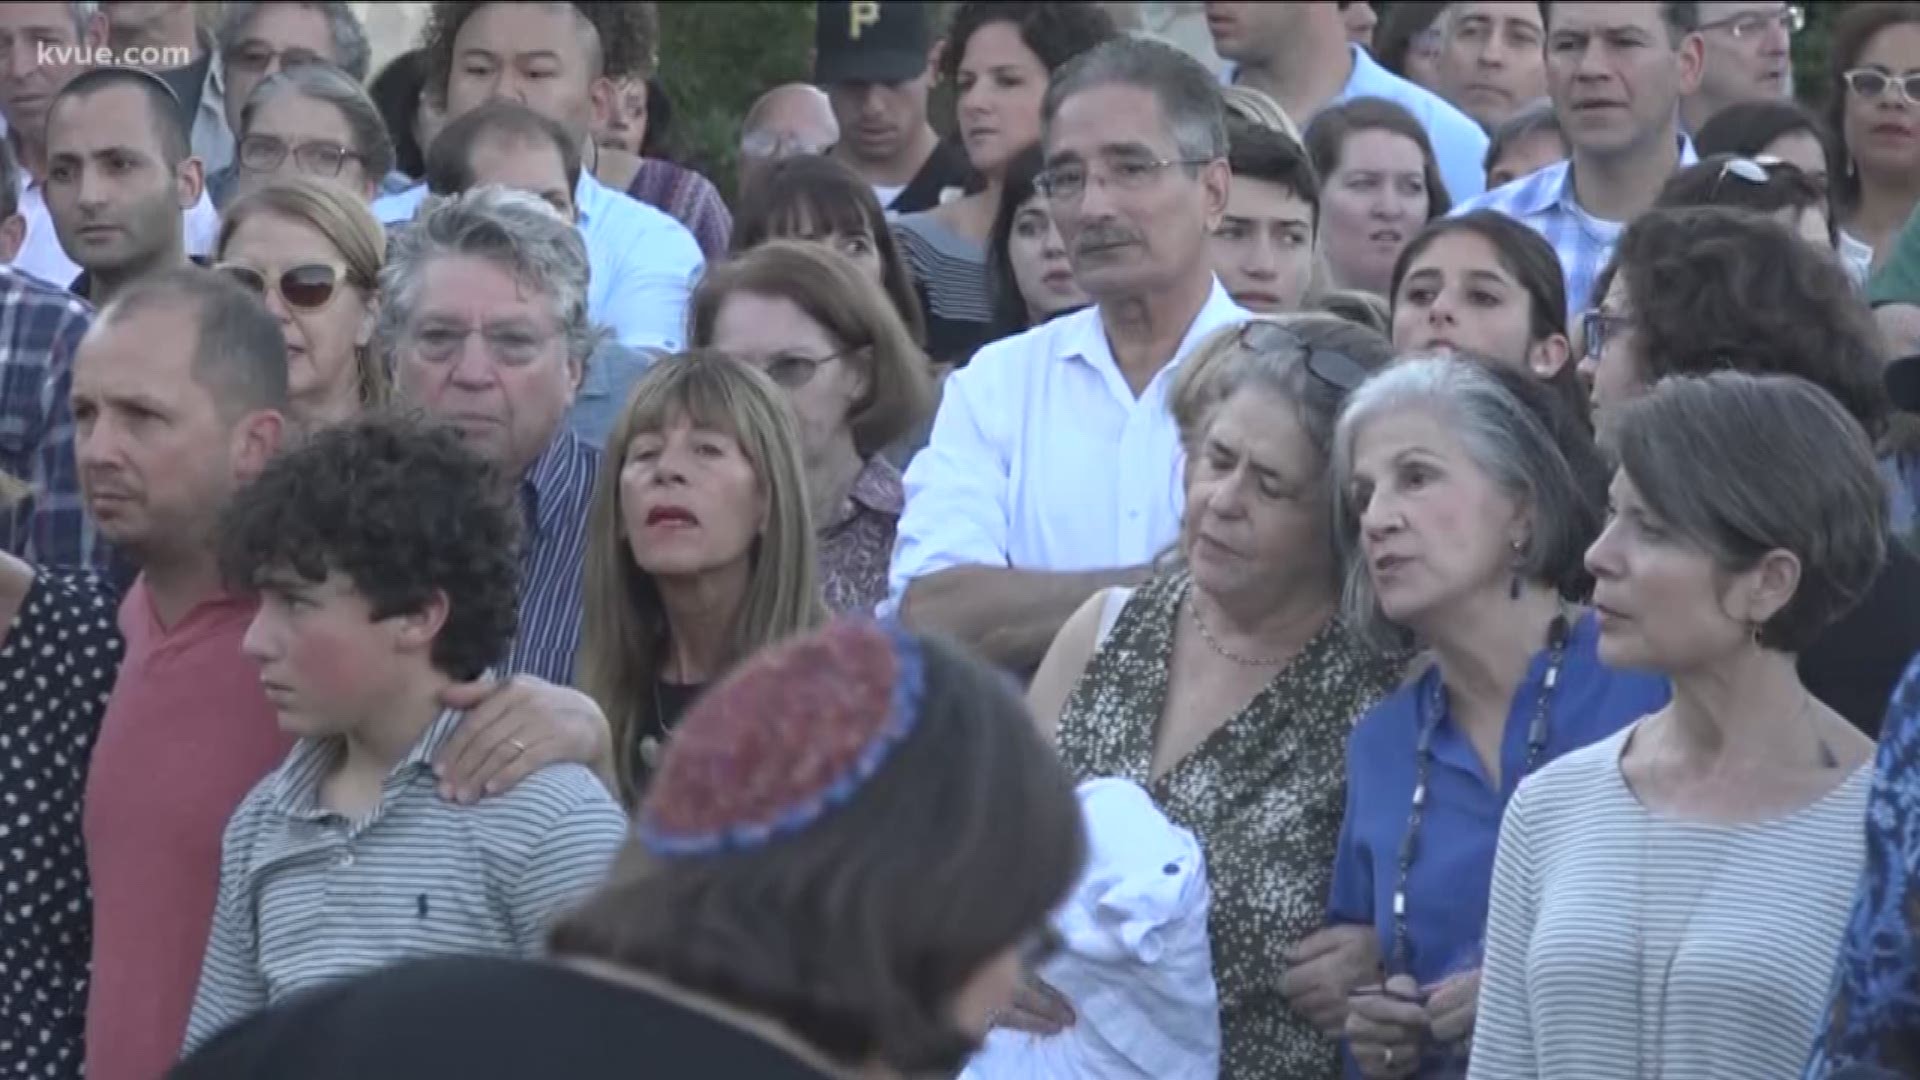 Here in Austin, hundreds of people packed into the Jewish Community Center in West Austin to hold a vigil and show that they will not be silenced following a fatal attack in Pittsburgh.